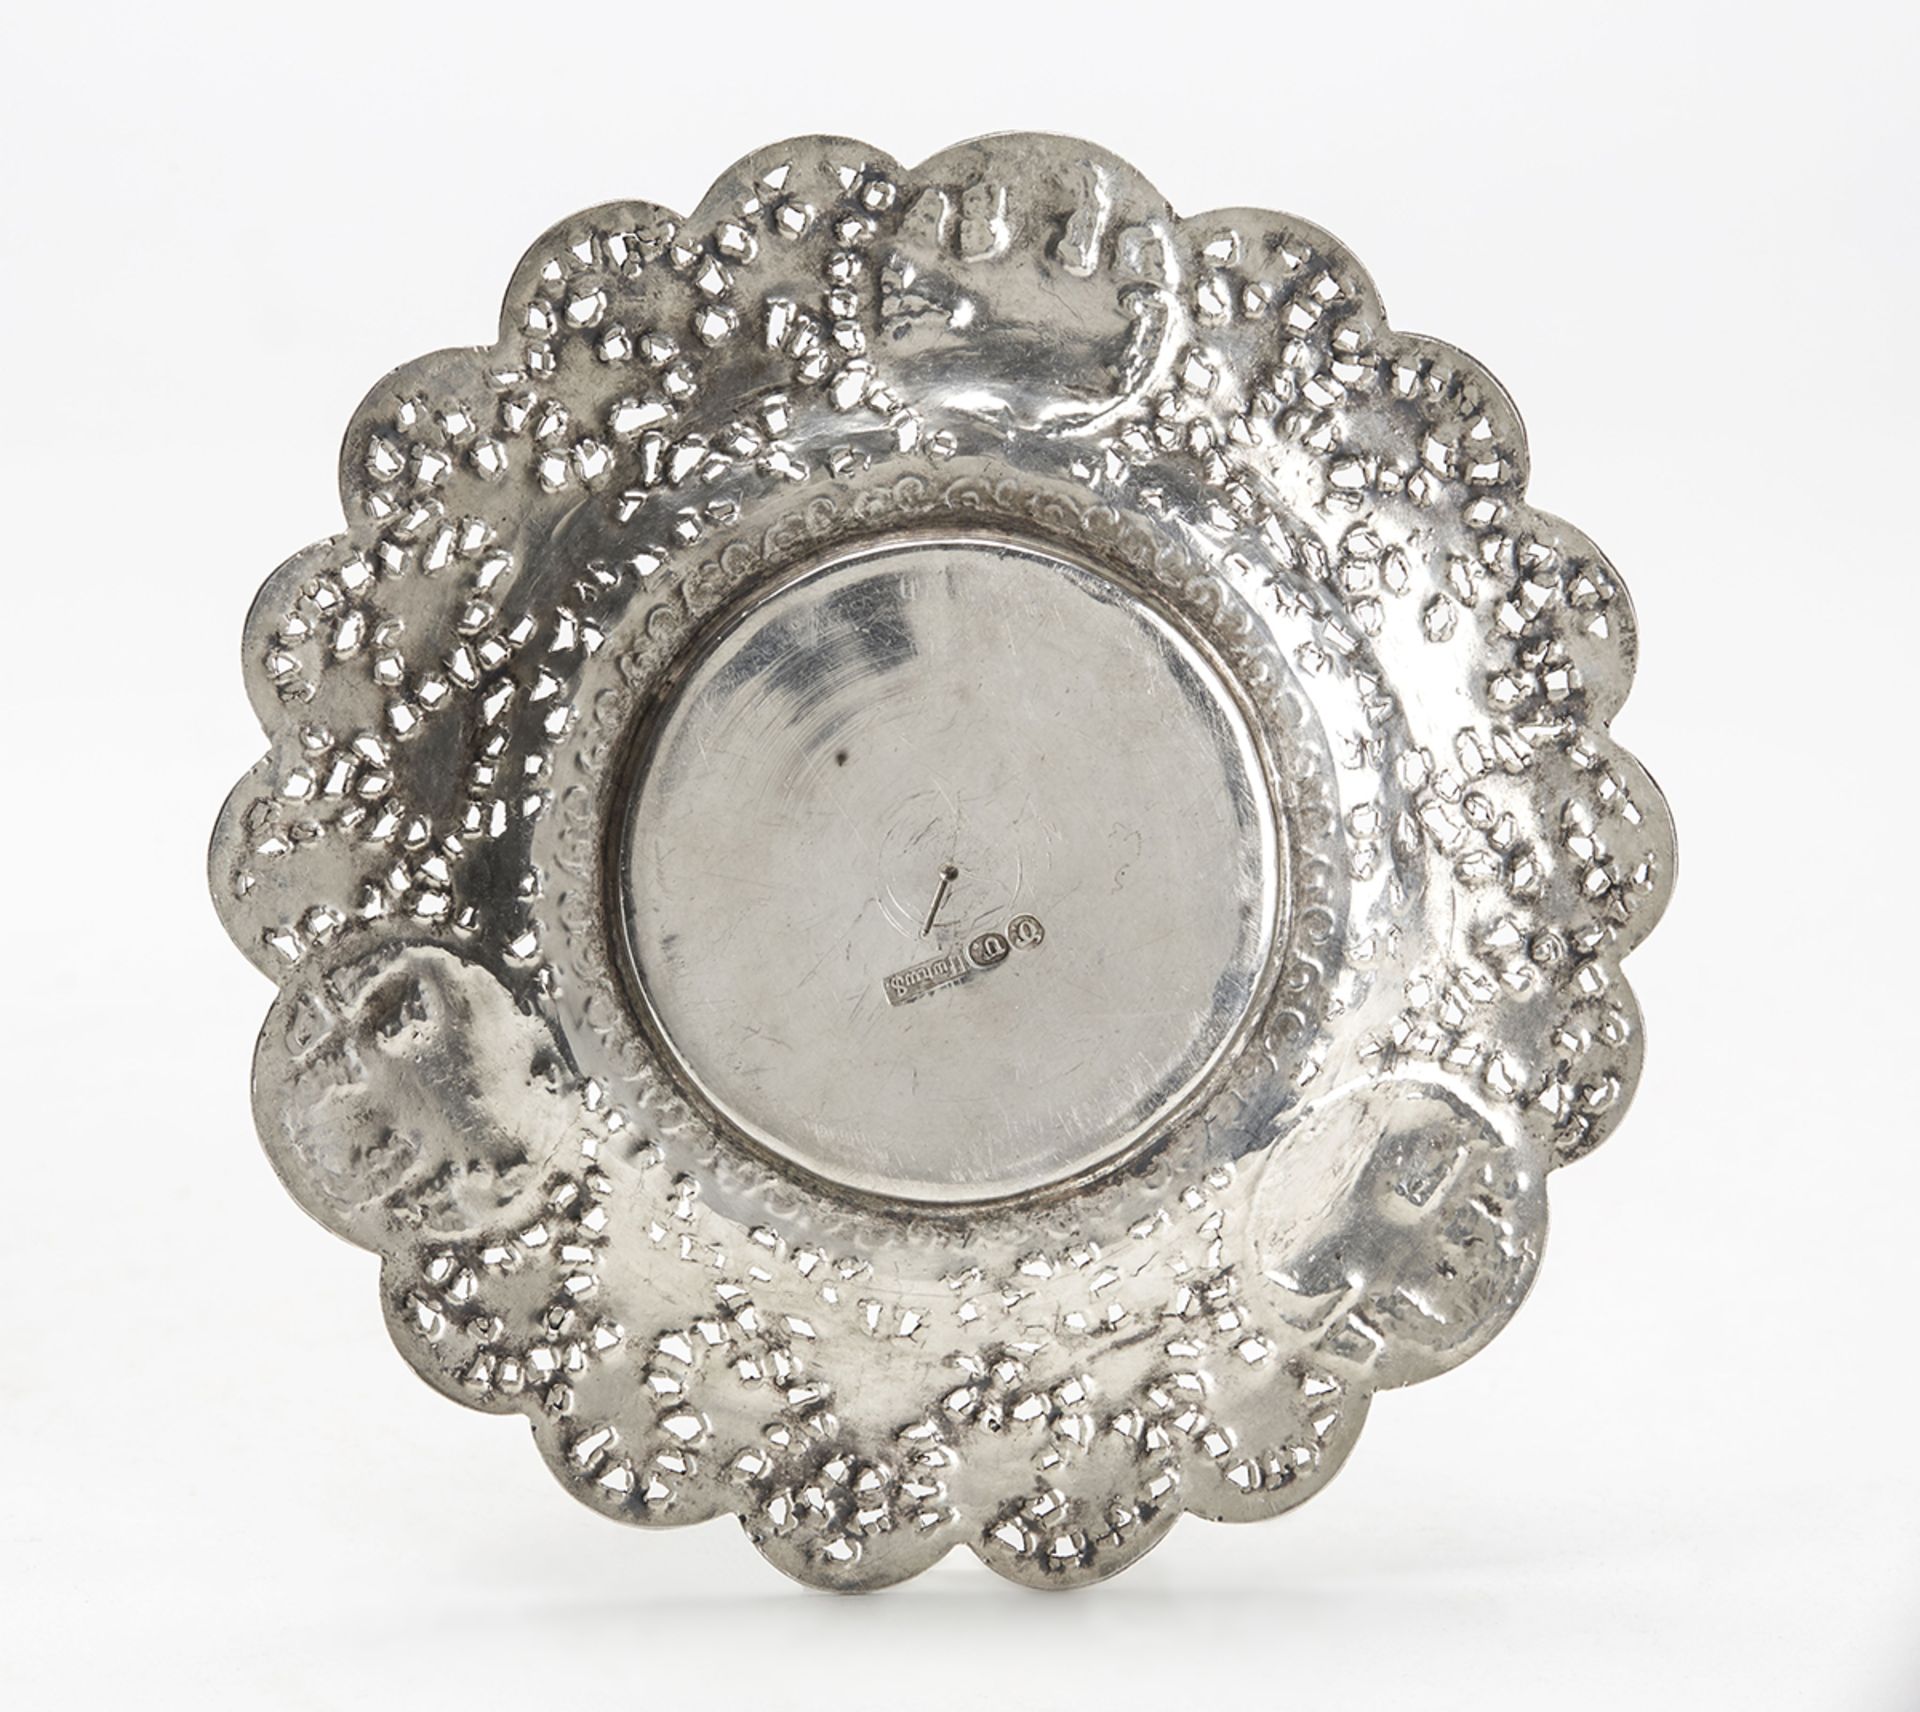 Antique Indian/Asian Silver Reticulated Dish Or Stand 19C. - Image 2 of 7